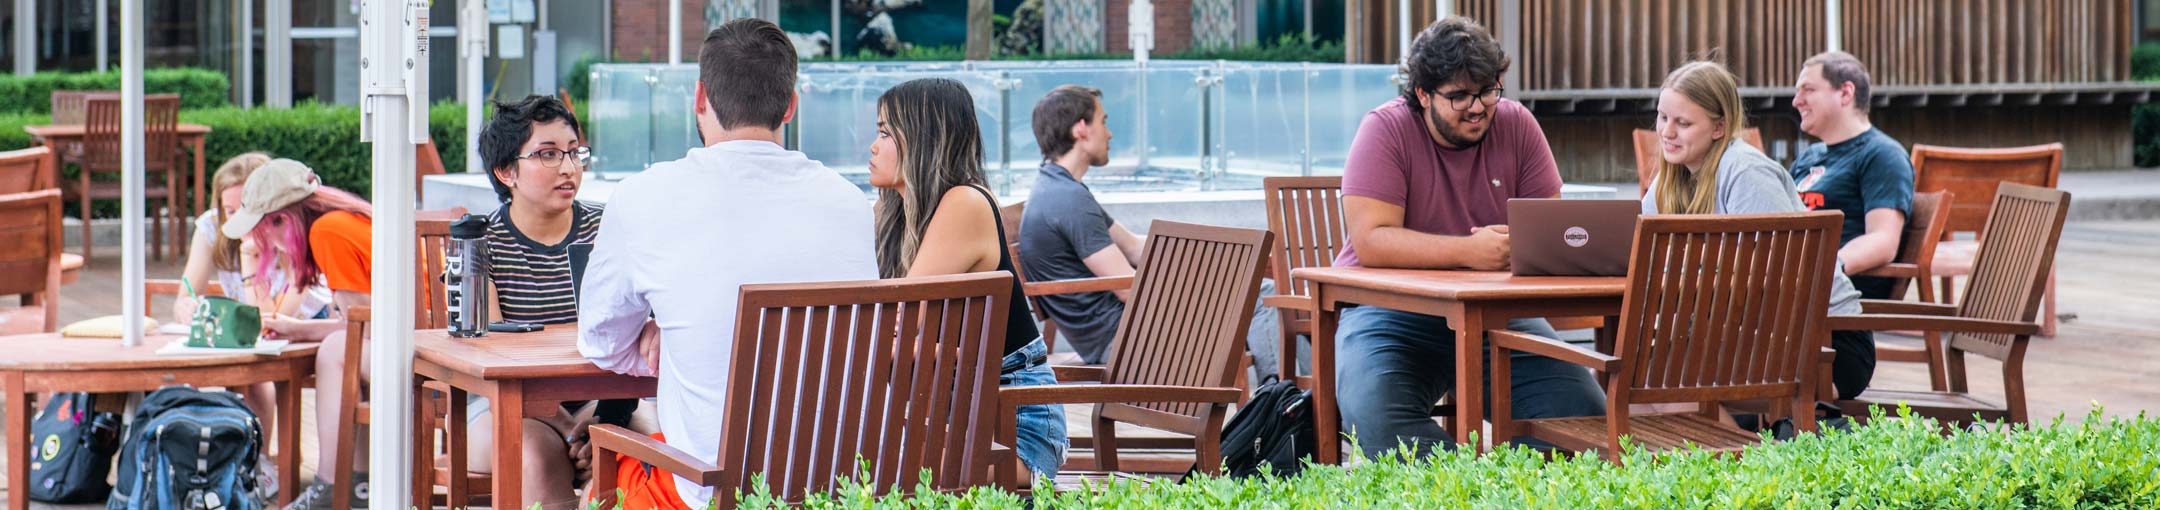 students sit at tables in a plaza by a water feature